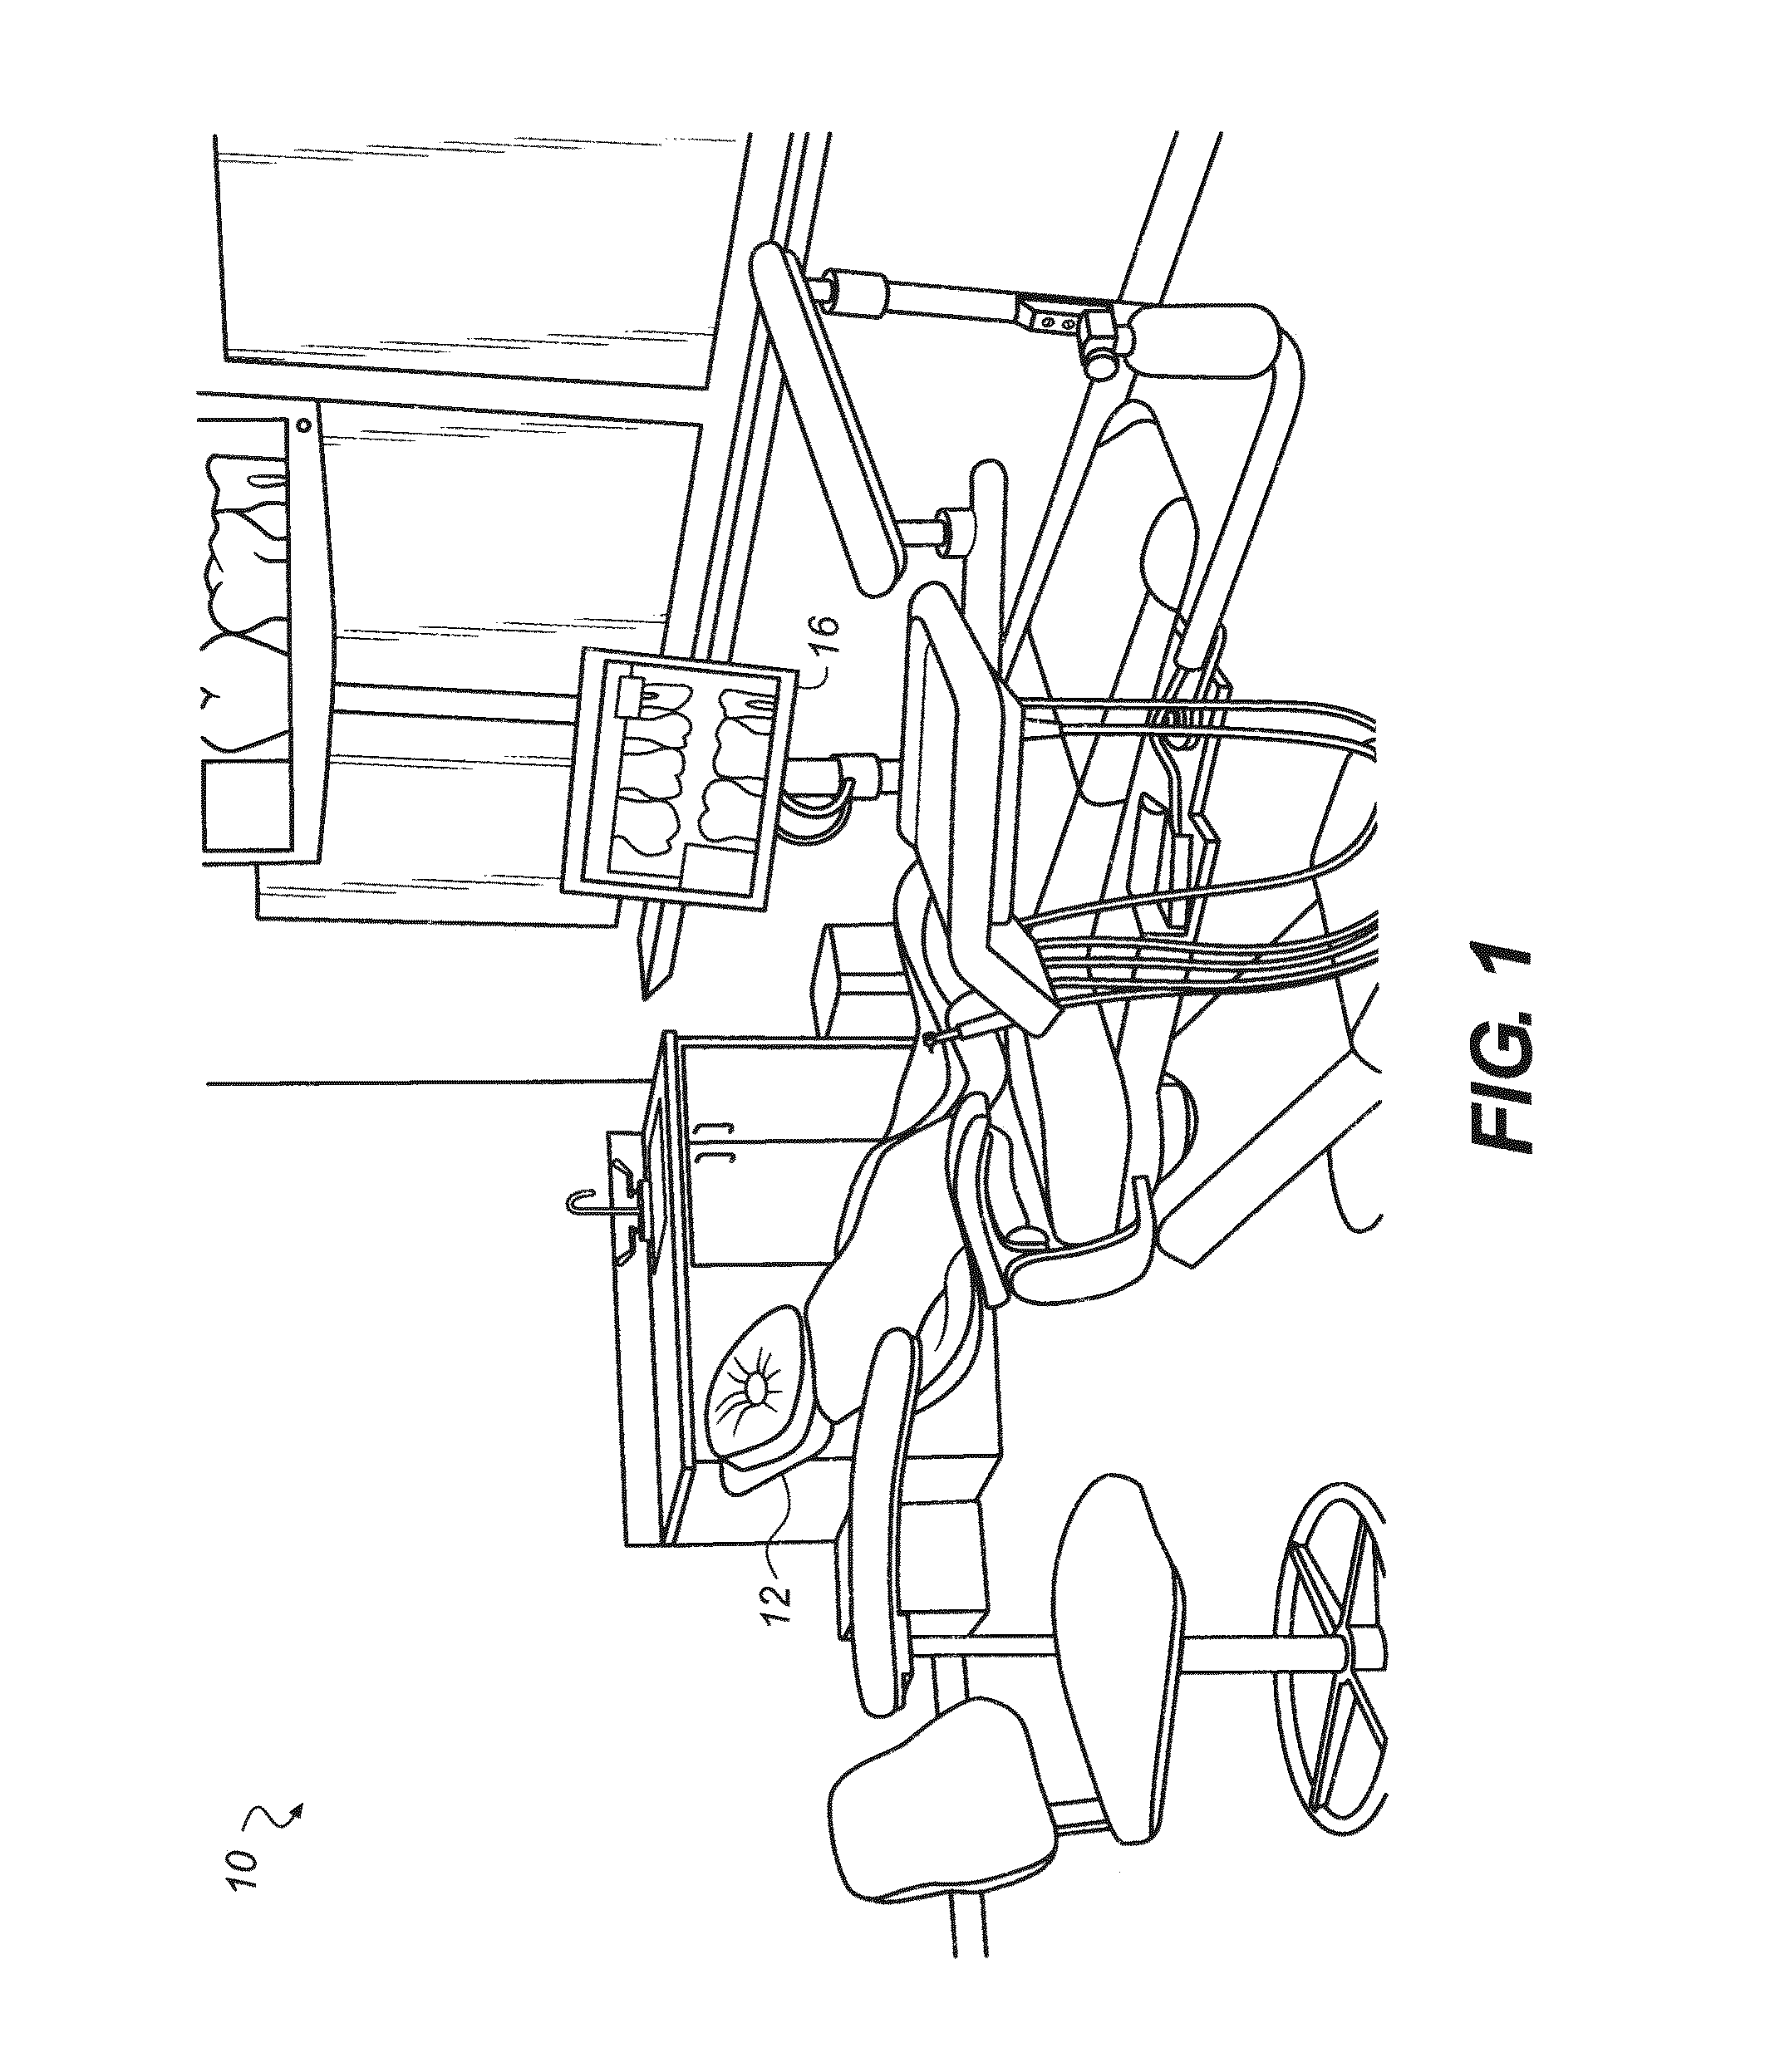 Method and system for phosphor plate identification in computed radiography